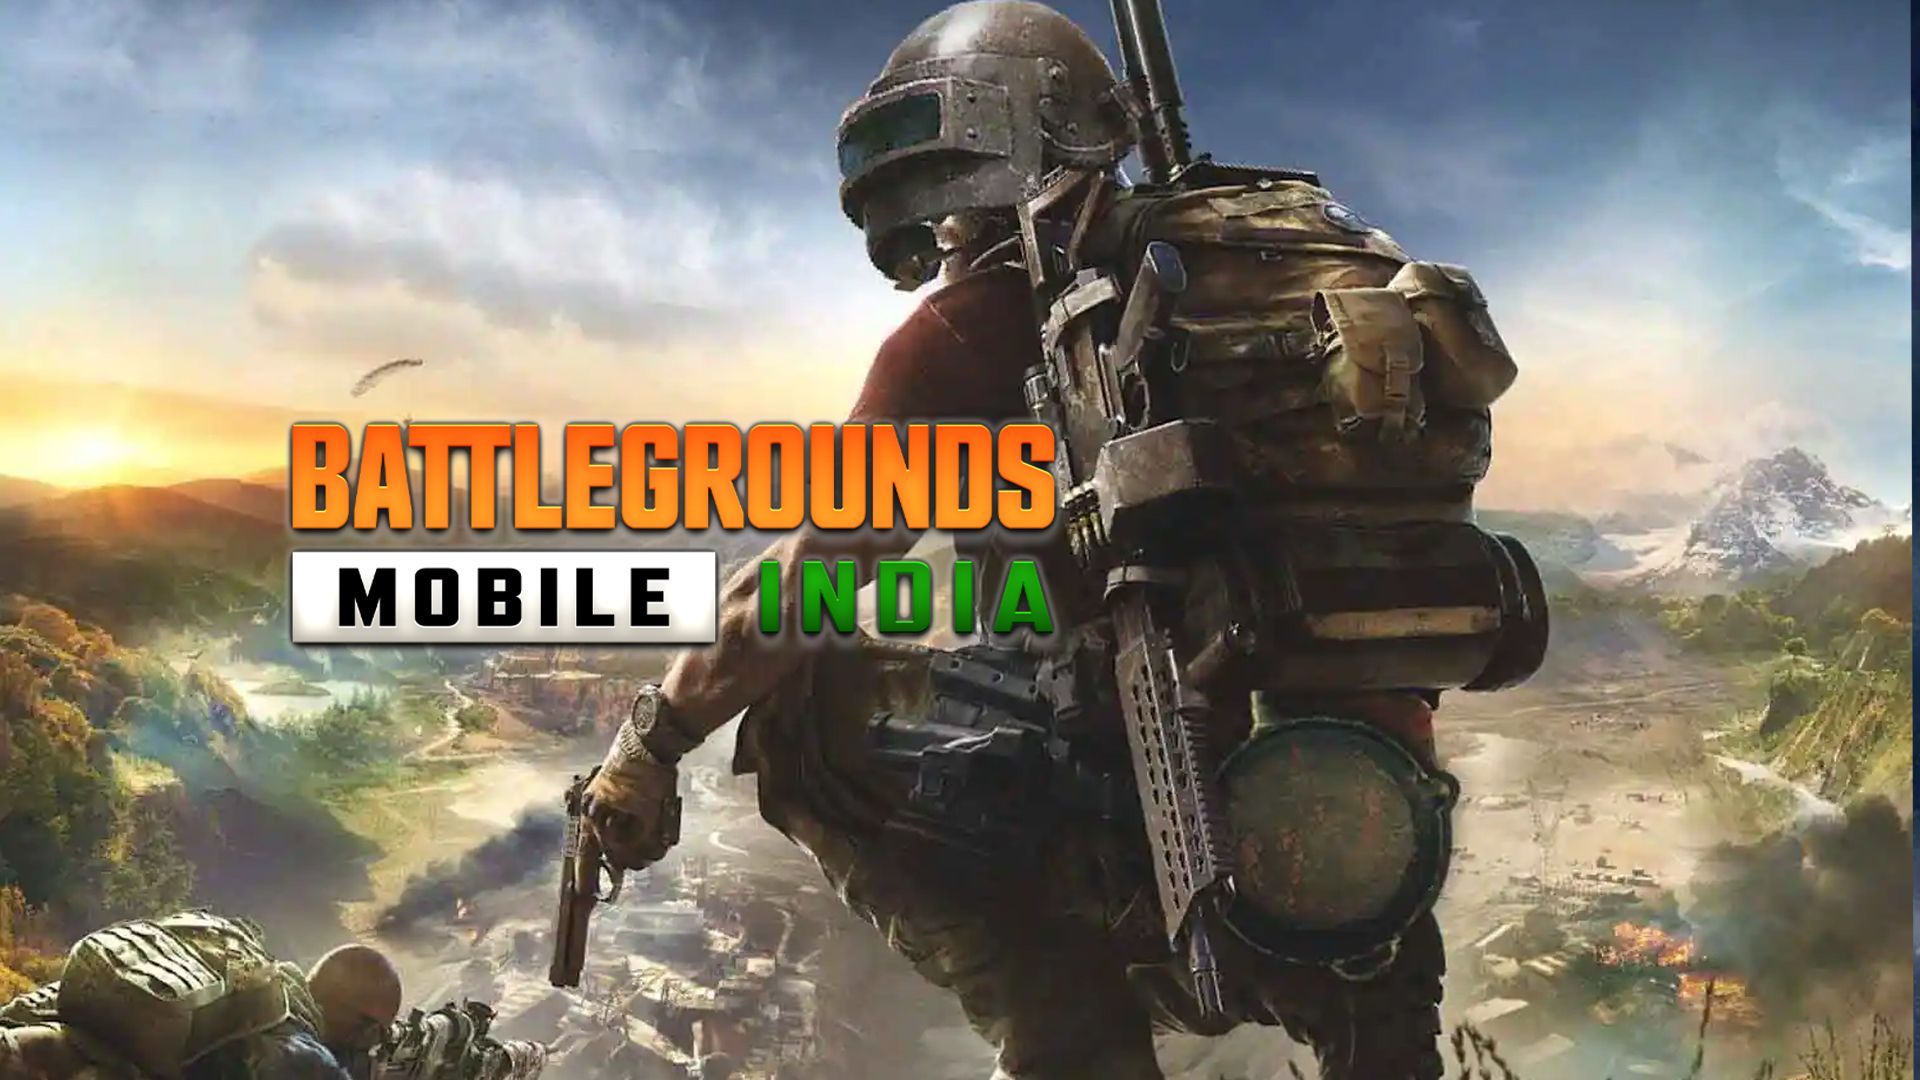 PUBG Mobile India Video Game Release Day in June? Take a look at most recent concept News Platform